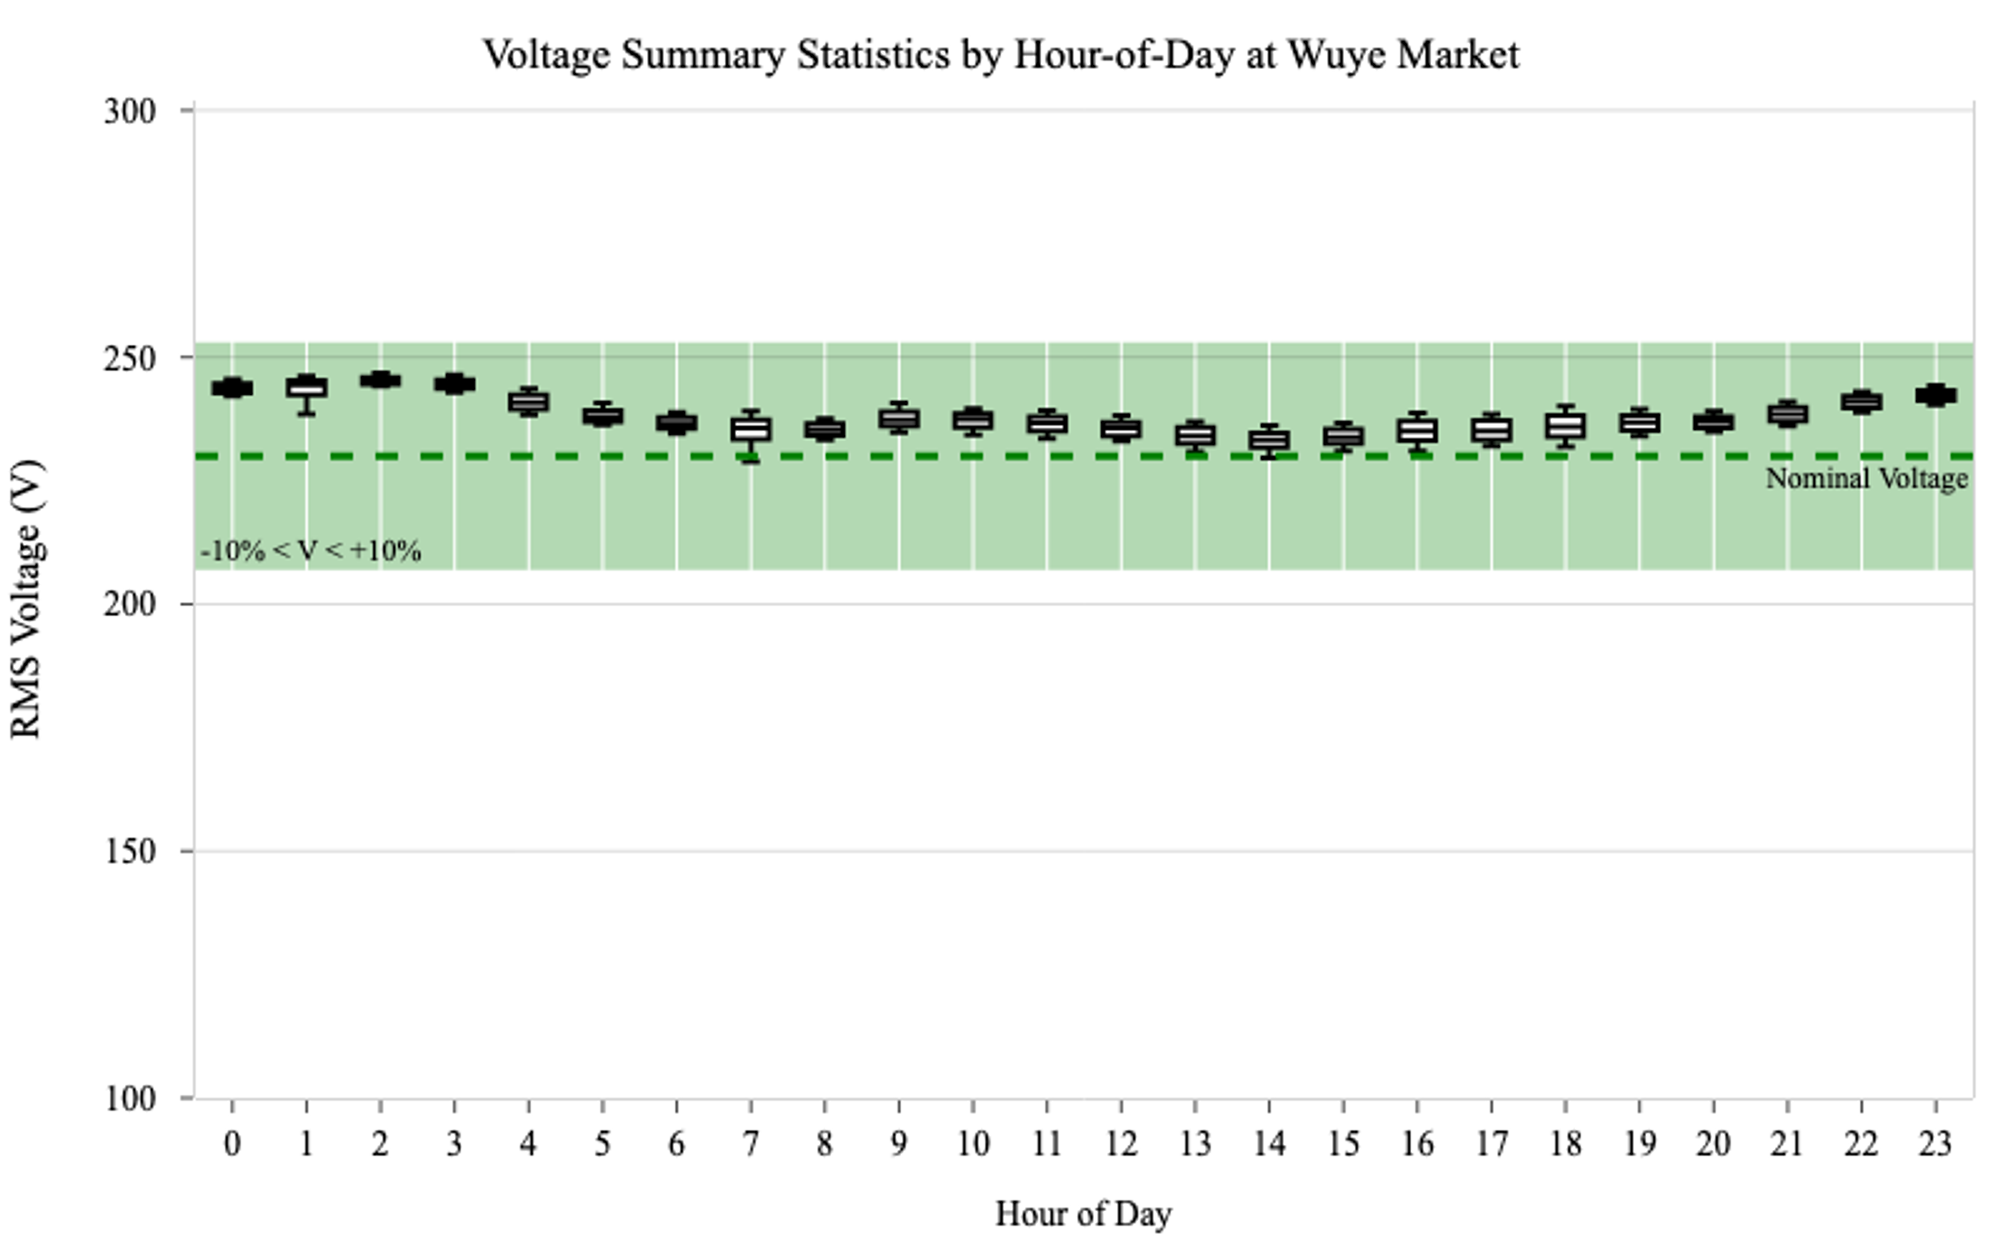 Figure 7: Hourly distribution of voltage at Wuye Market. The green region demarcates the recommended voltage tolerance window of ±10% of the nominal voltage of 230V. During market hours (roughly 8 AM - 6 PM), voltage levels are within ±10% of 230V. The voltage is higher during the night but remains within this IEEE-recommended tolerance window. This, therefore, suggests that the voltage at Wuye Market is of good quality.